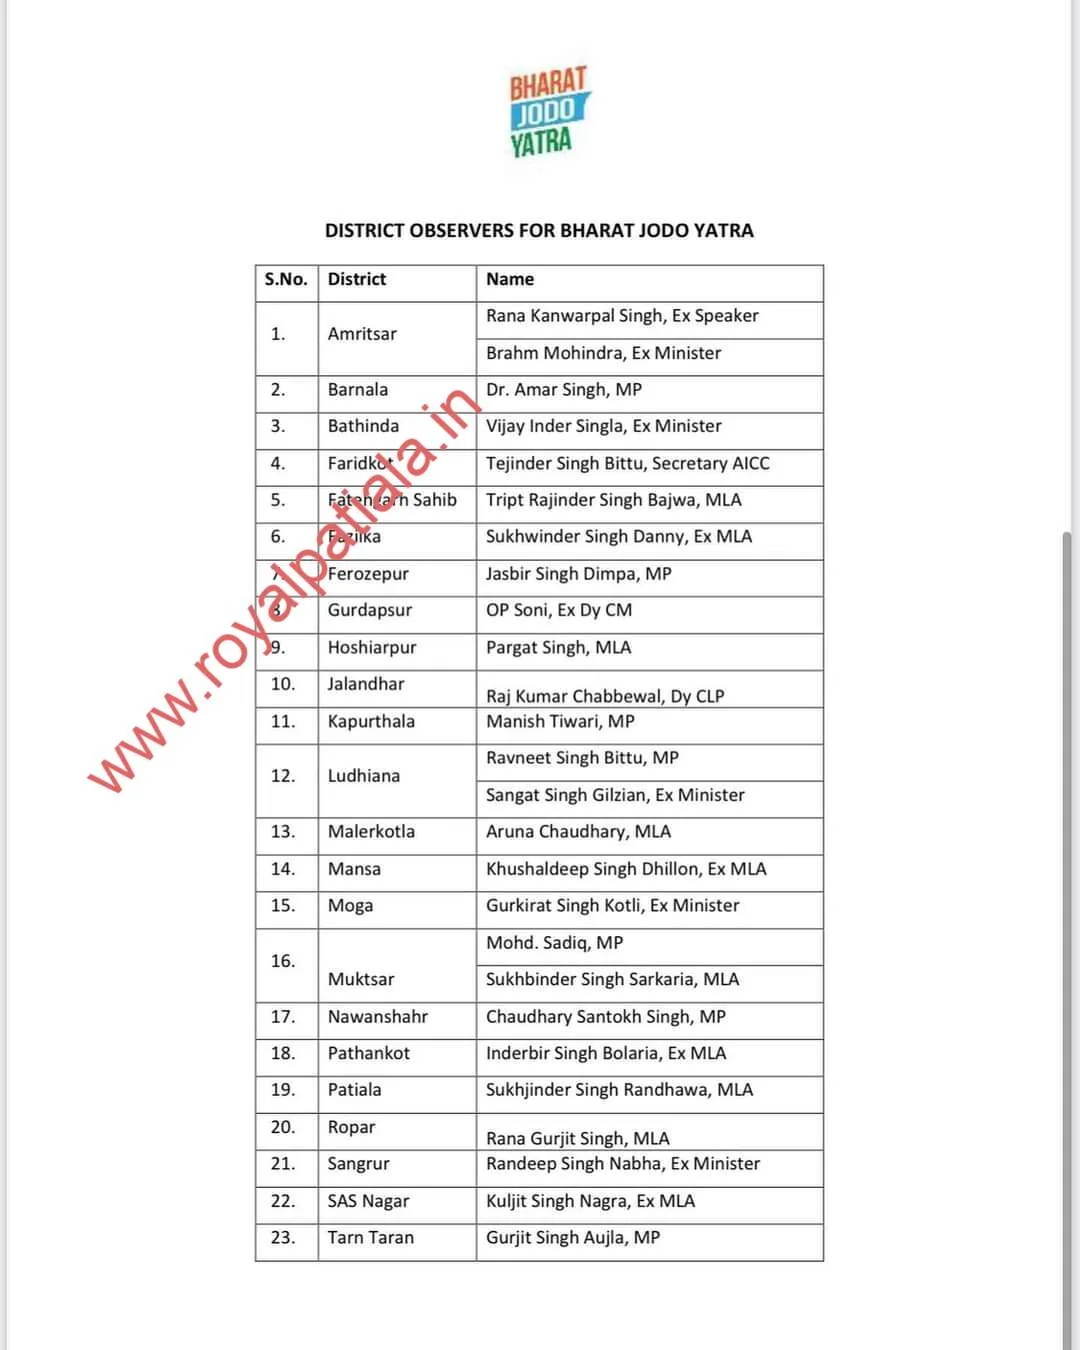 Amarinder Singh appointed 26 leaders as district observers for Bharat Jodo Yatra